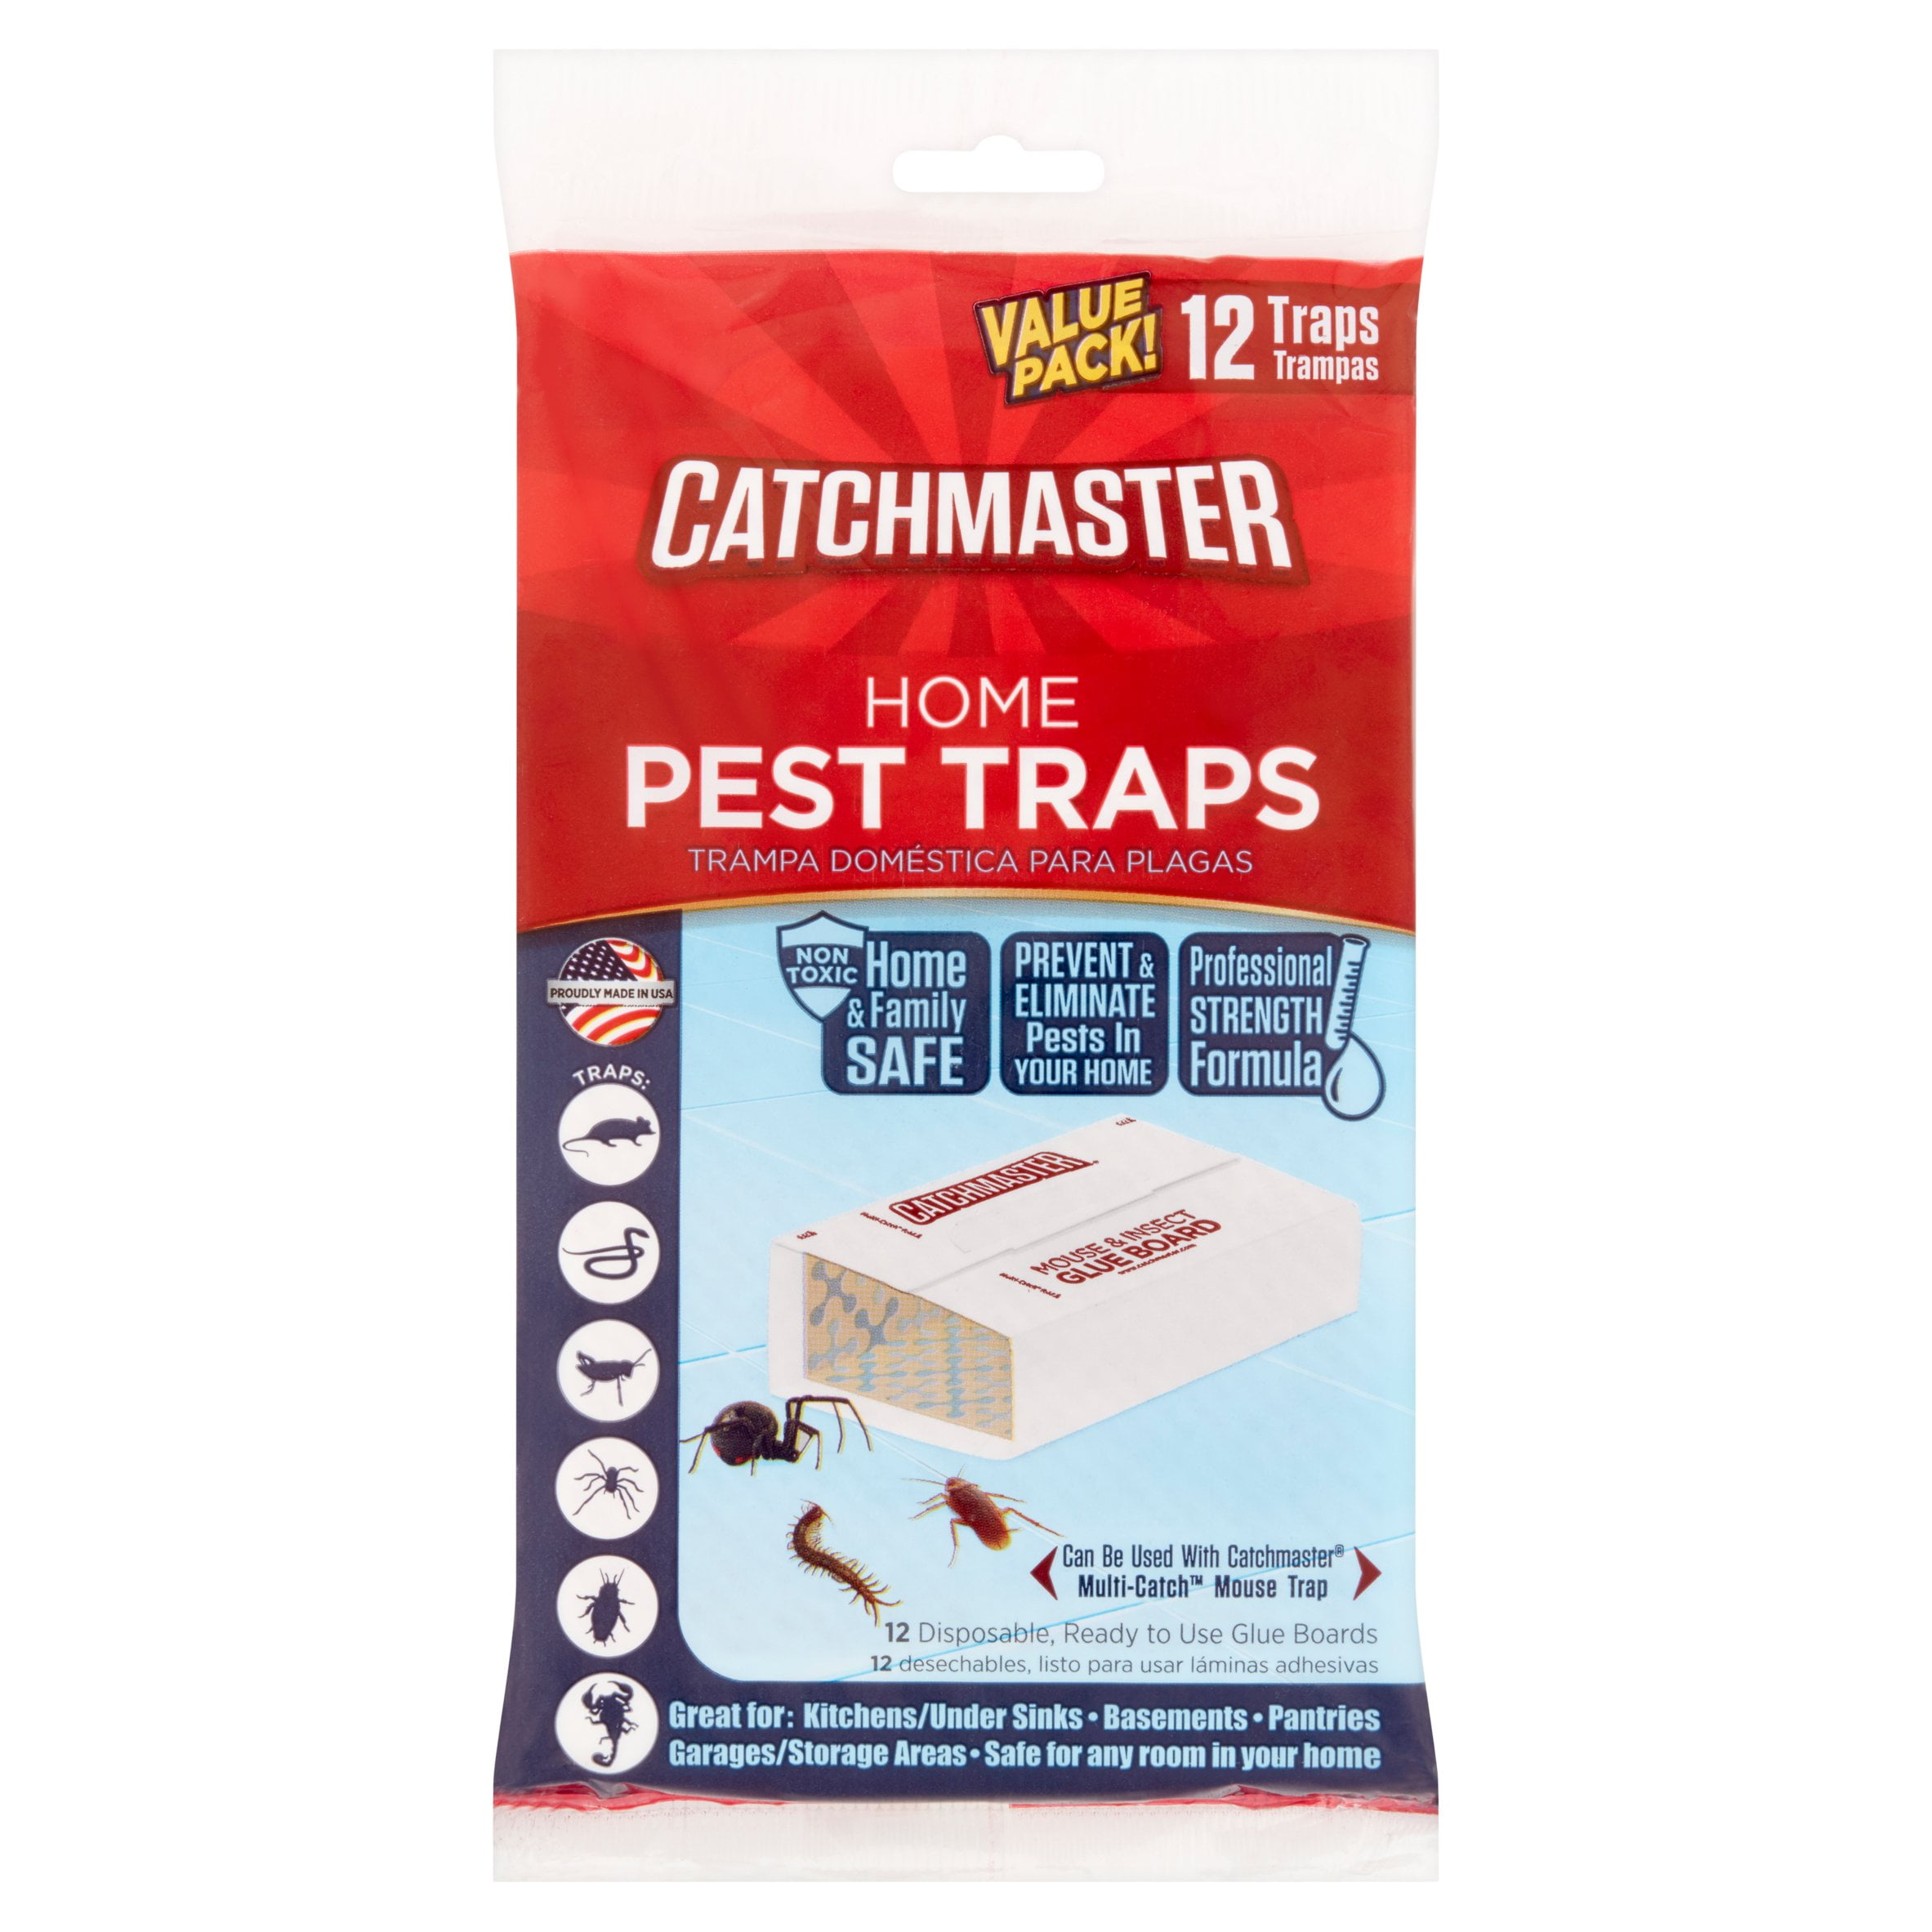 Catchmaster Value Pack Home Pest Traps 12 Count - Scented to attract ...